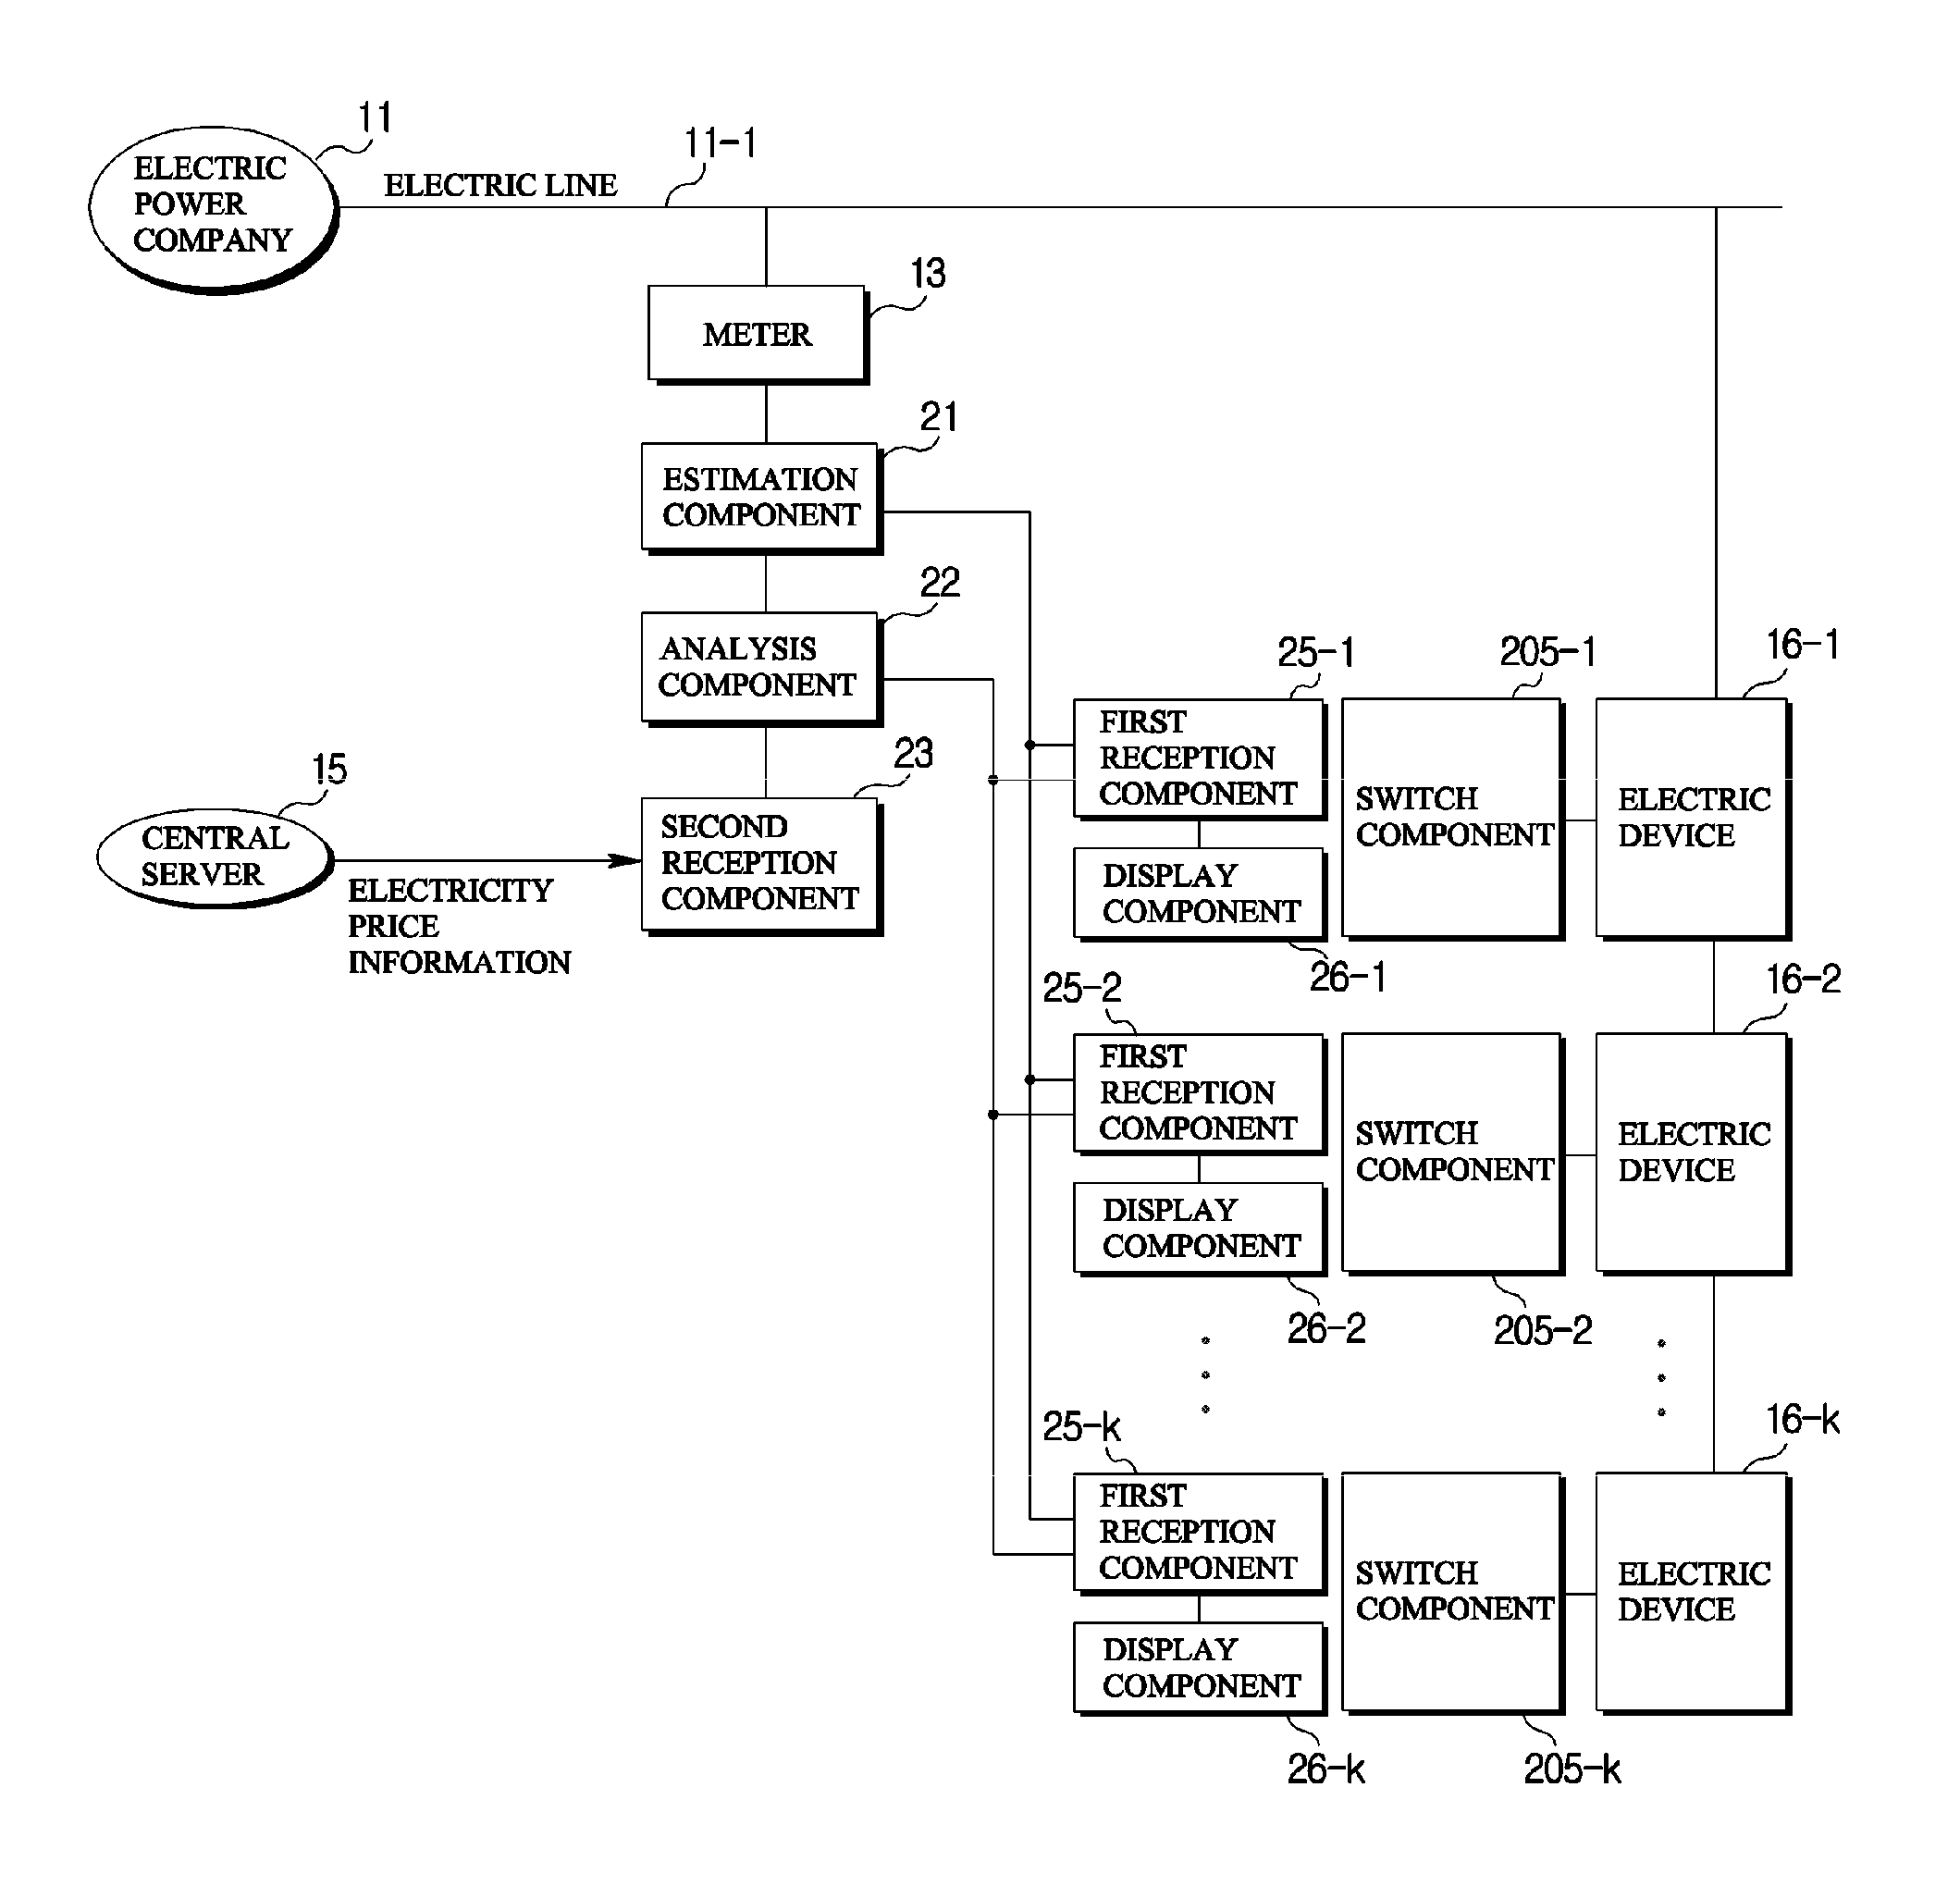 Apparatus and method for energy management of electric devices